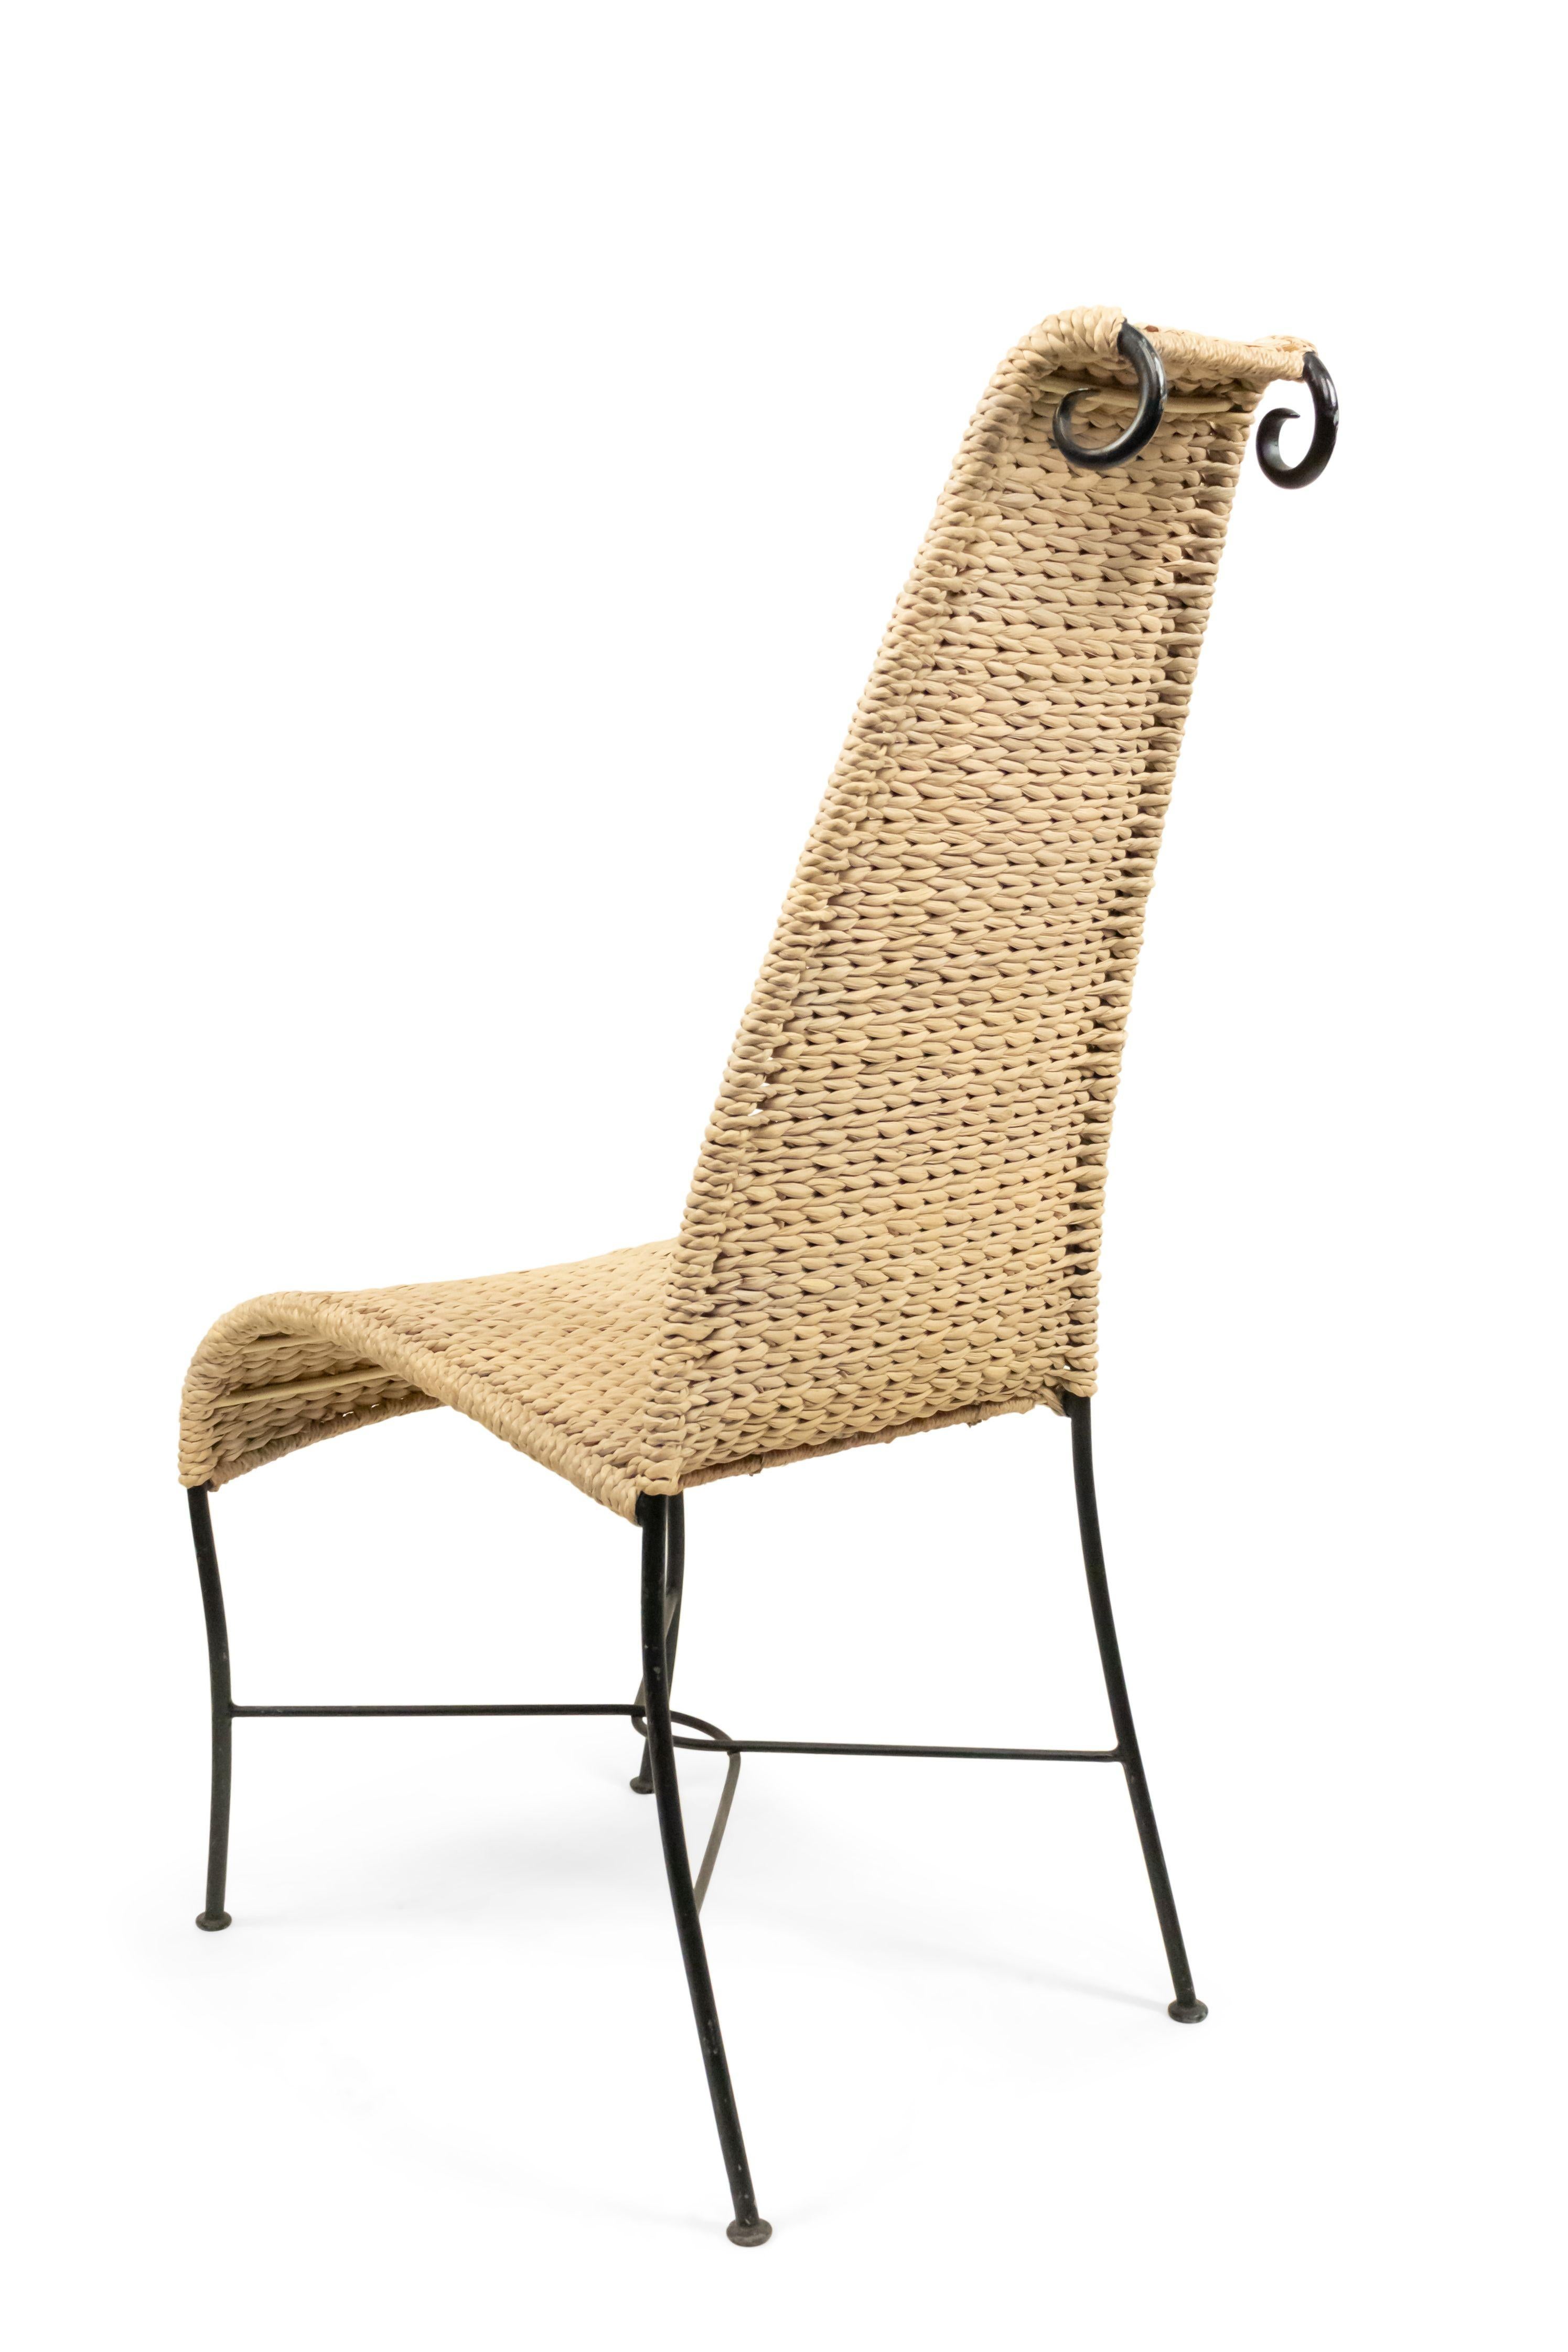 American Post-War Rattan Side Chair For Sale 7